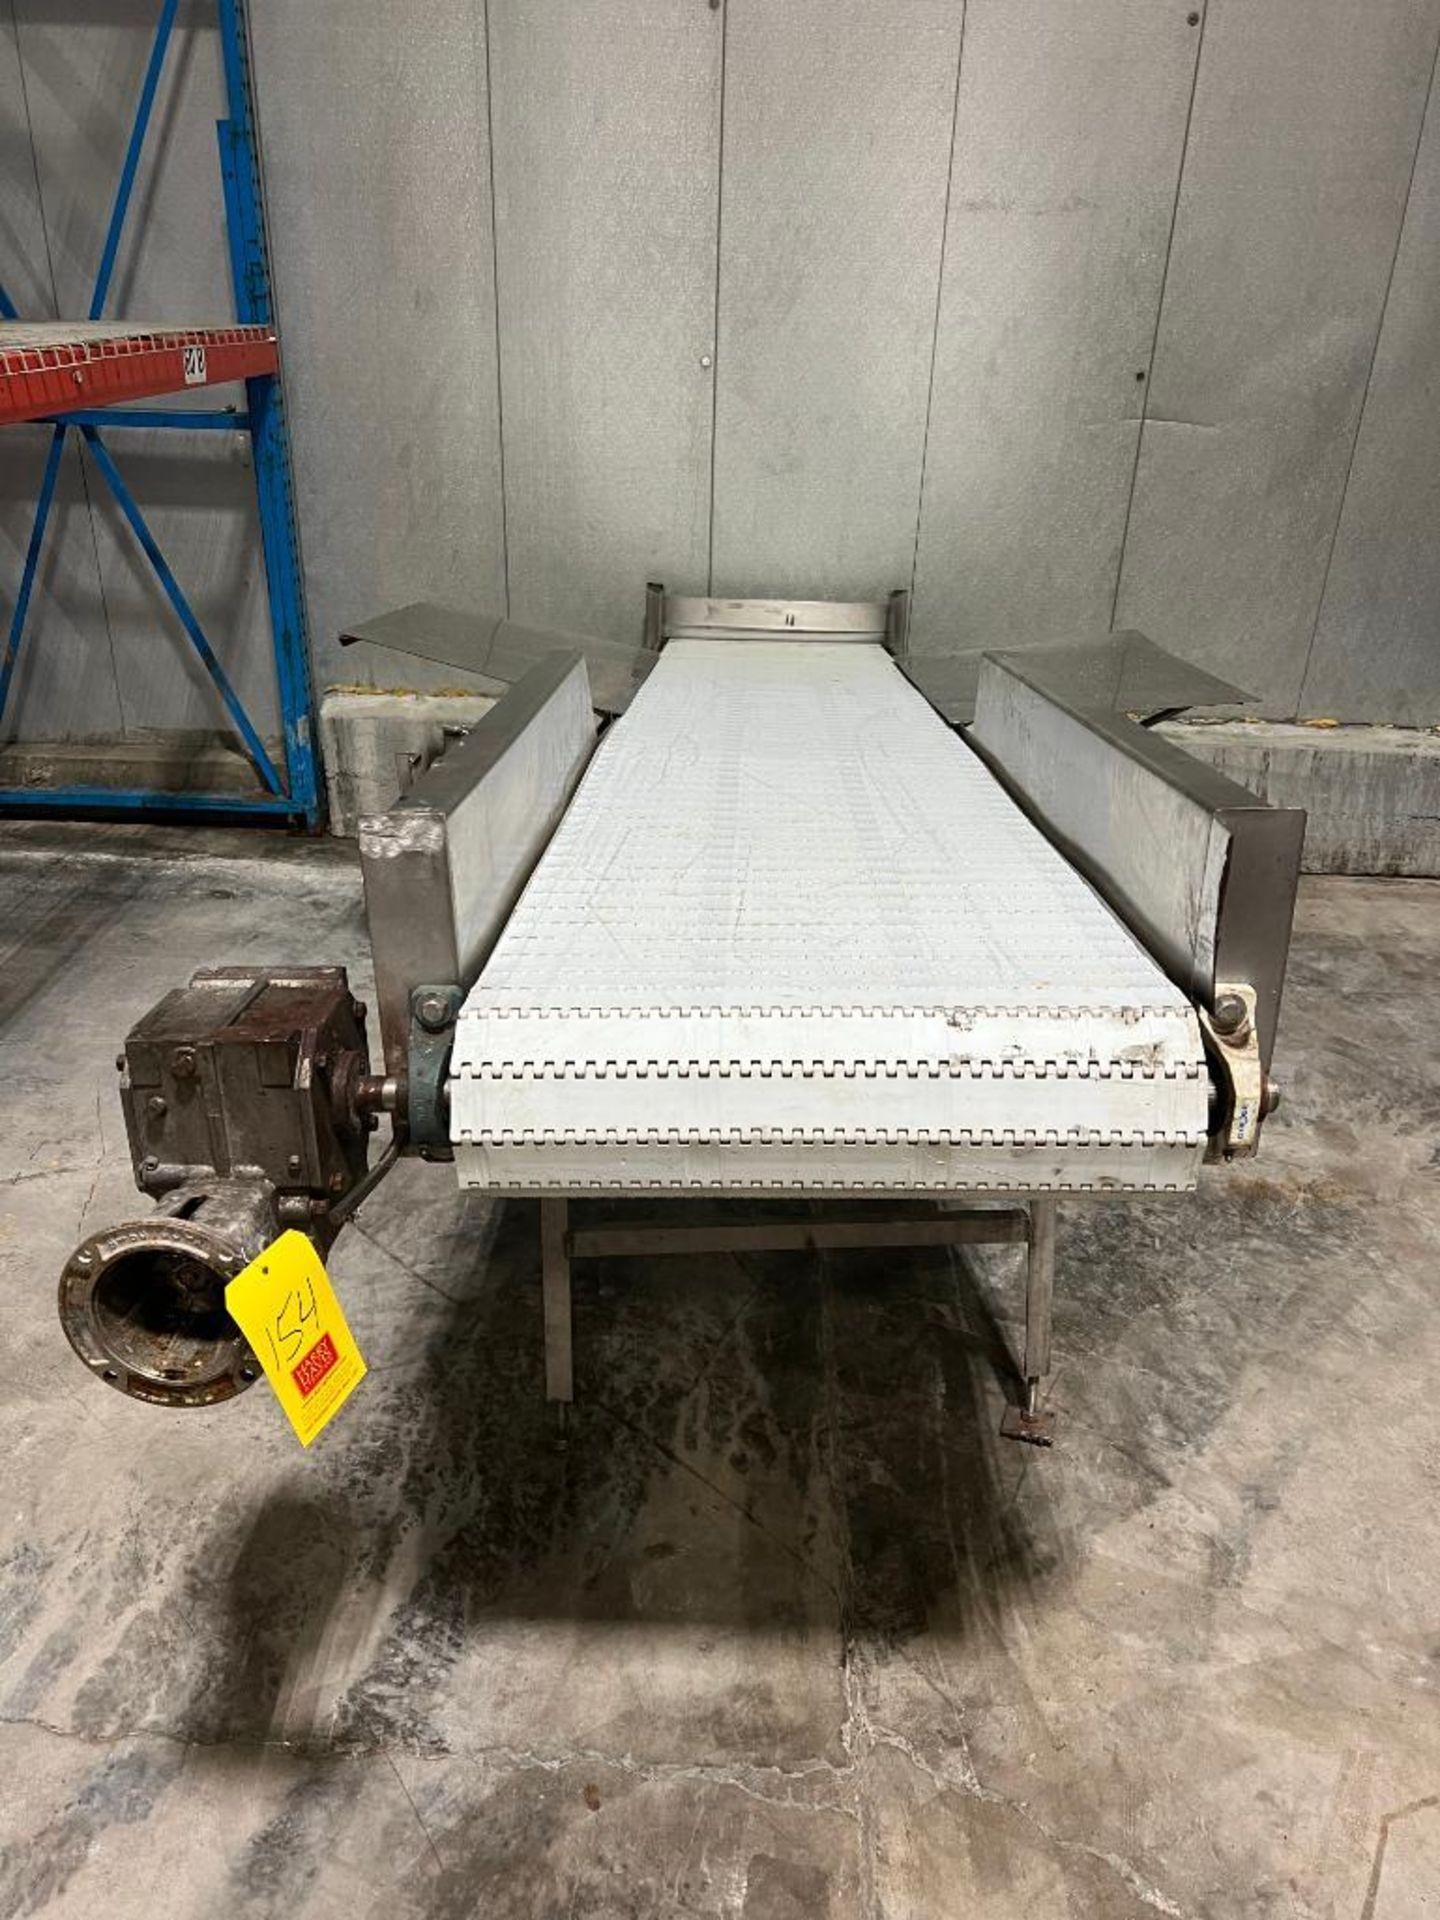 Pack Off S/S Frame Inclined Product Conveyor, Dimensions = 126" Length x 24" Width - Rigging Fee: $1 - Image 2 of 2